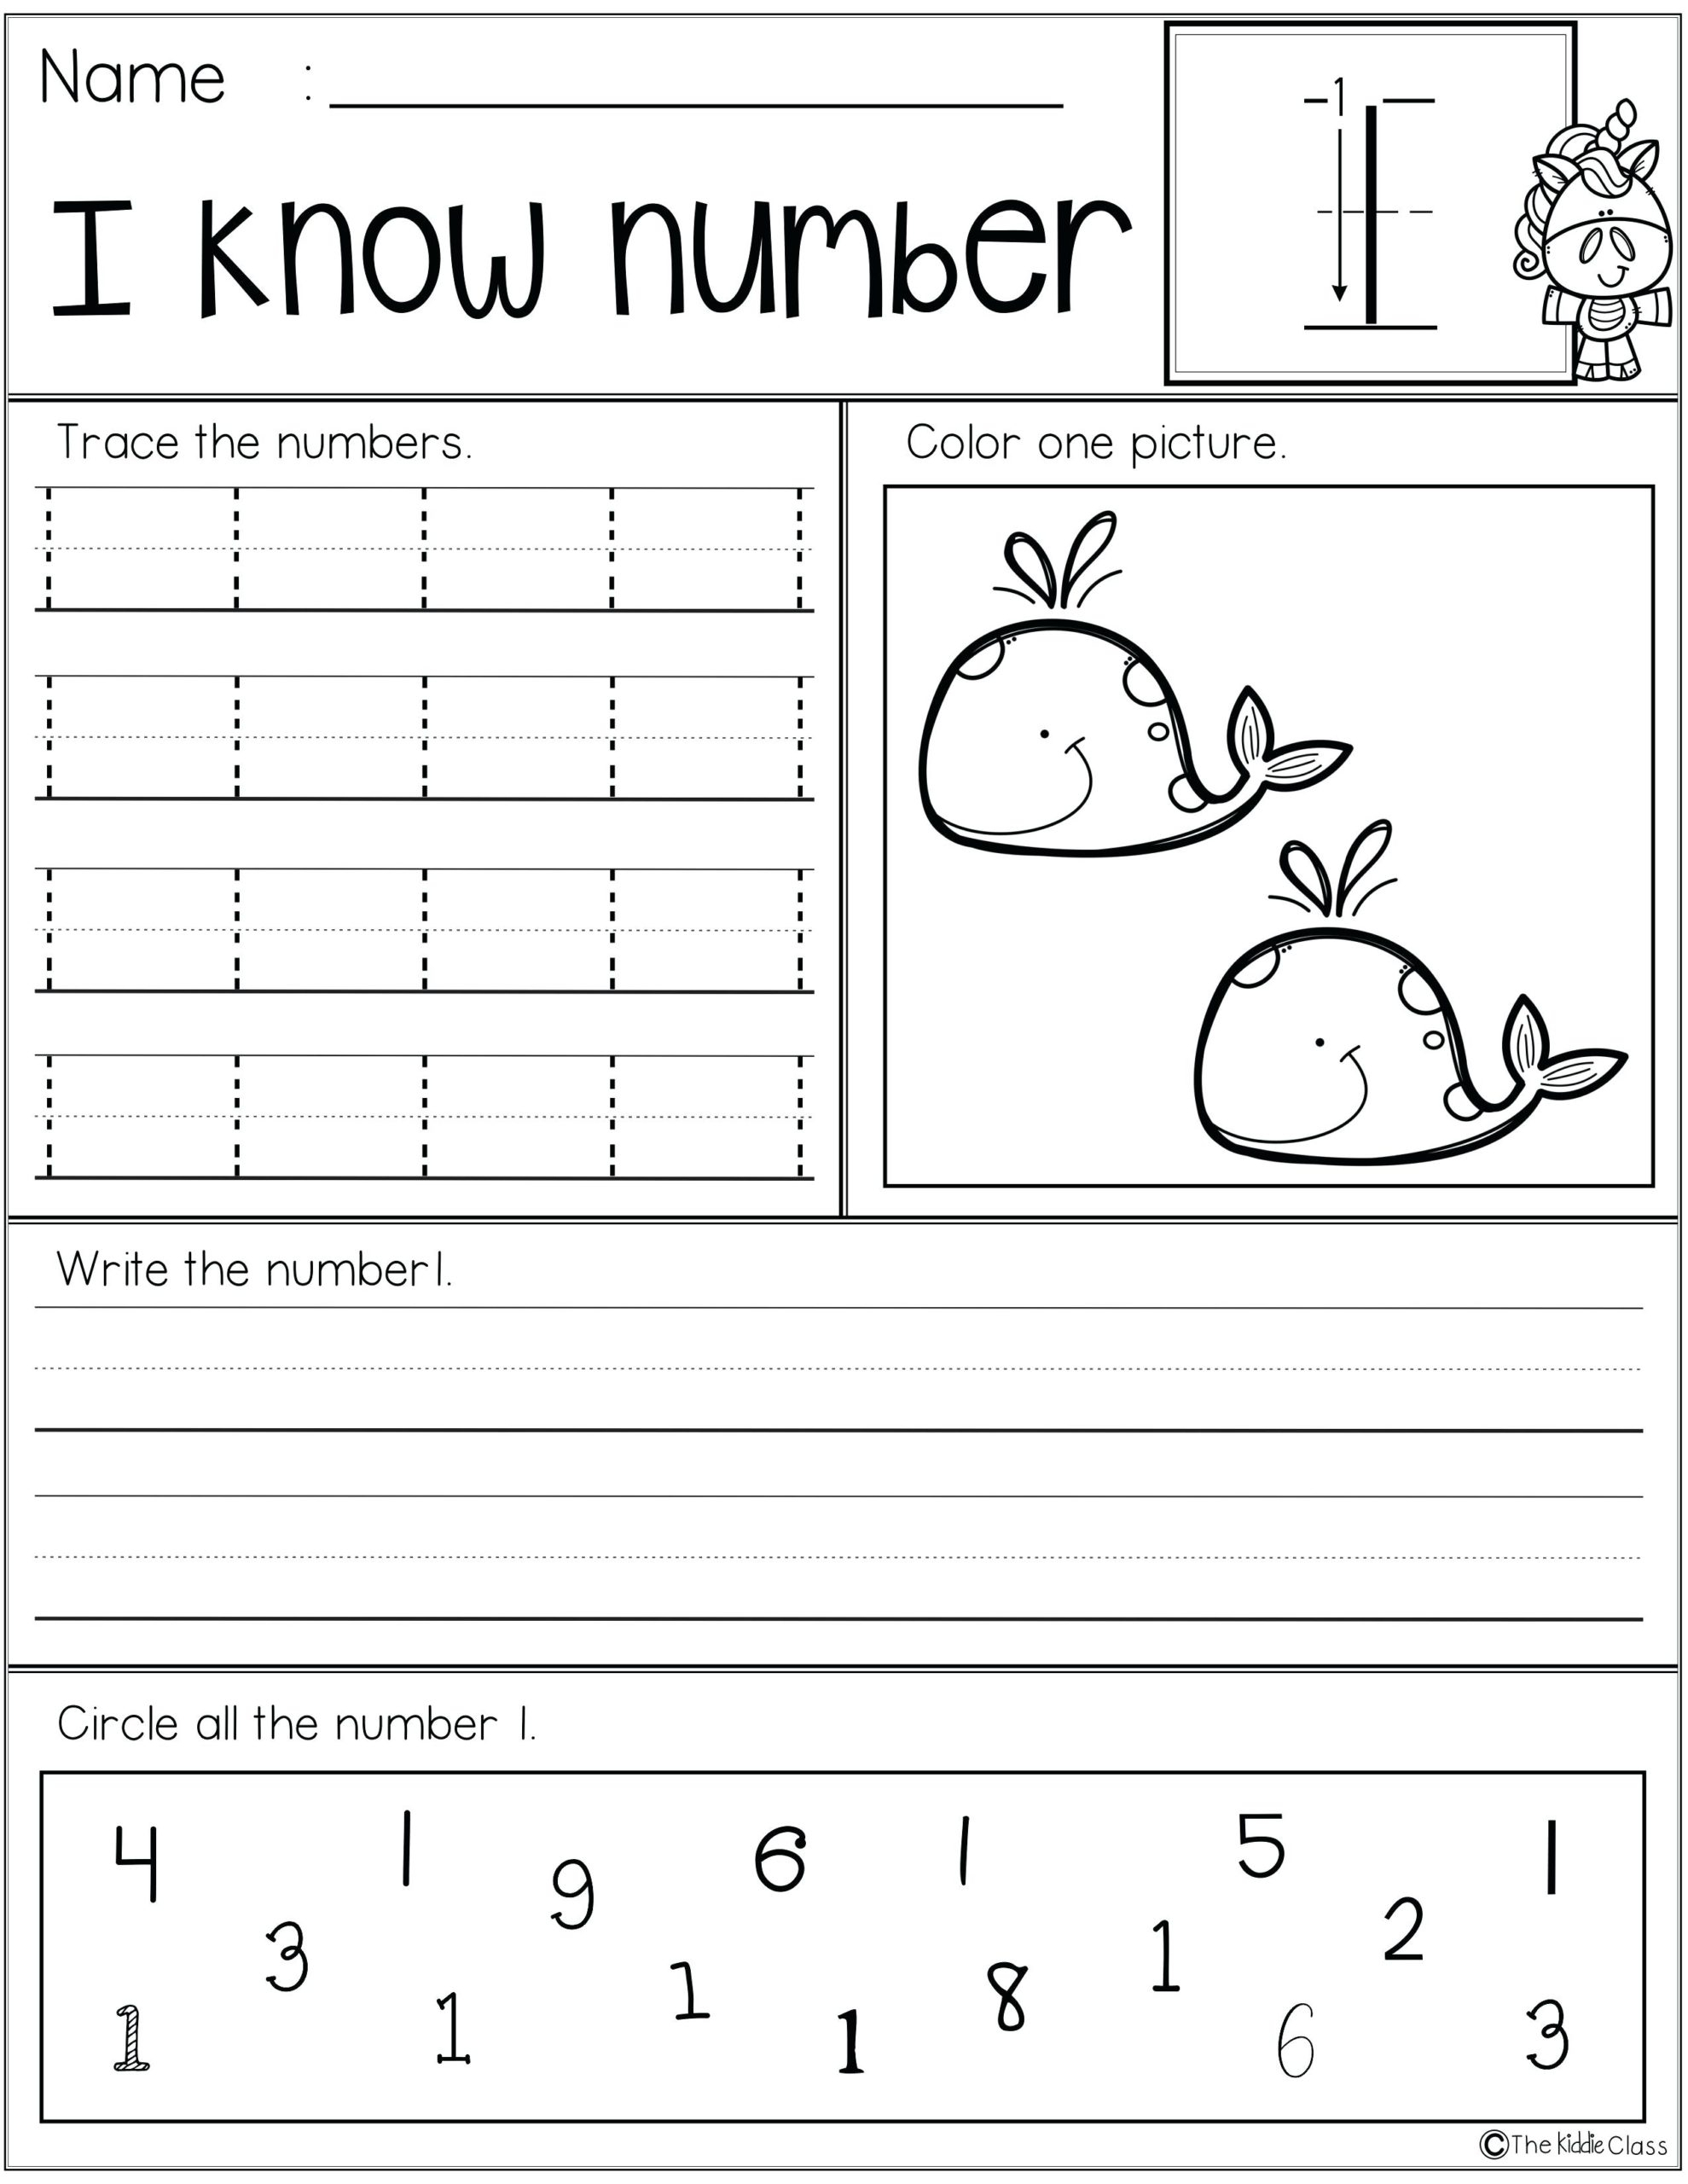 Worksheet : Cool Math Games Addition Reading Activities For pertaining to Name Tracing Kindergarten